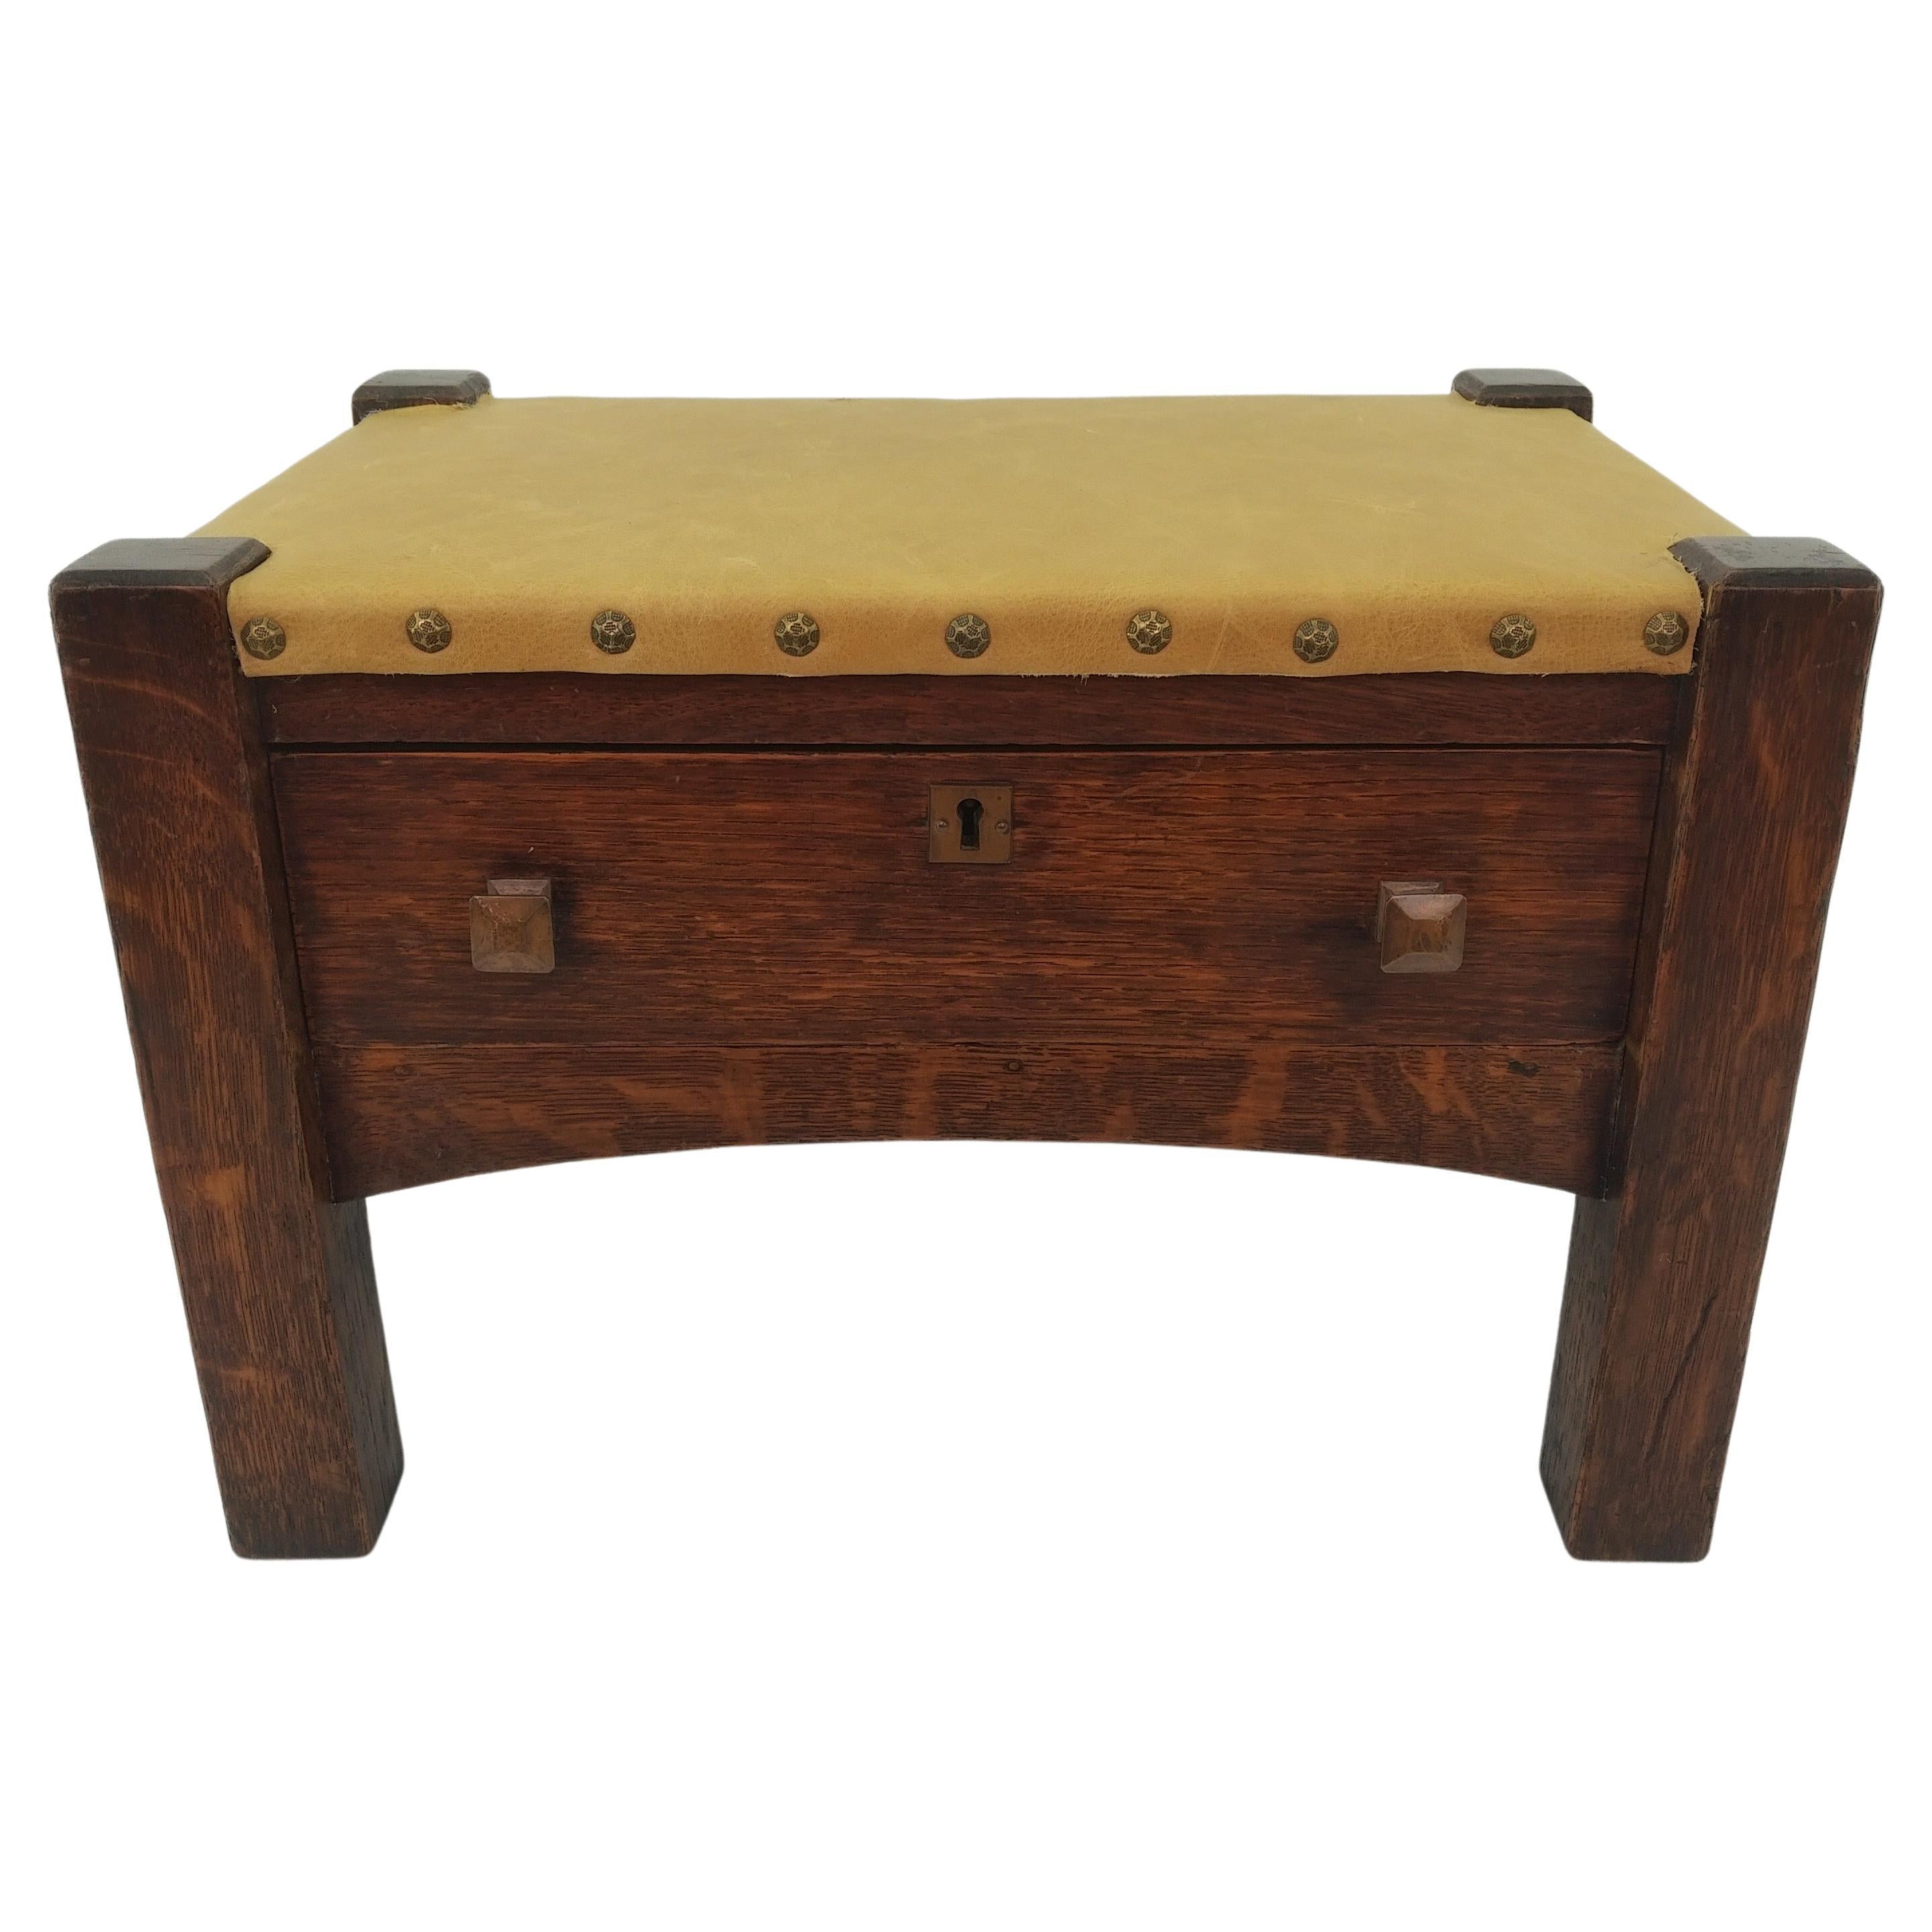 Charles Limbert One Drawer Footstool c1910 For Sale